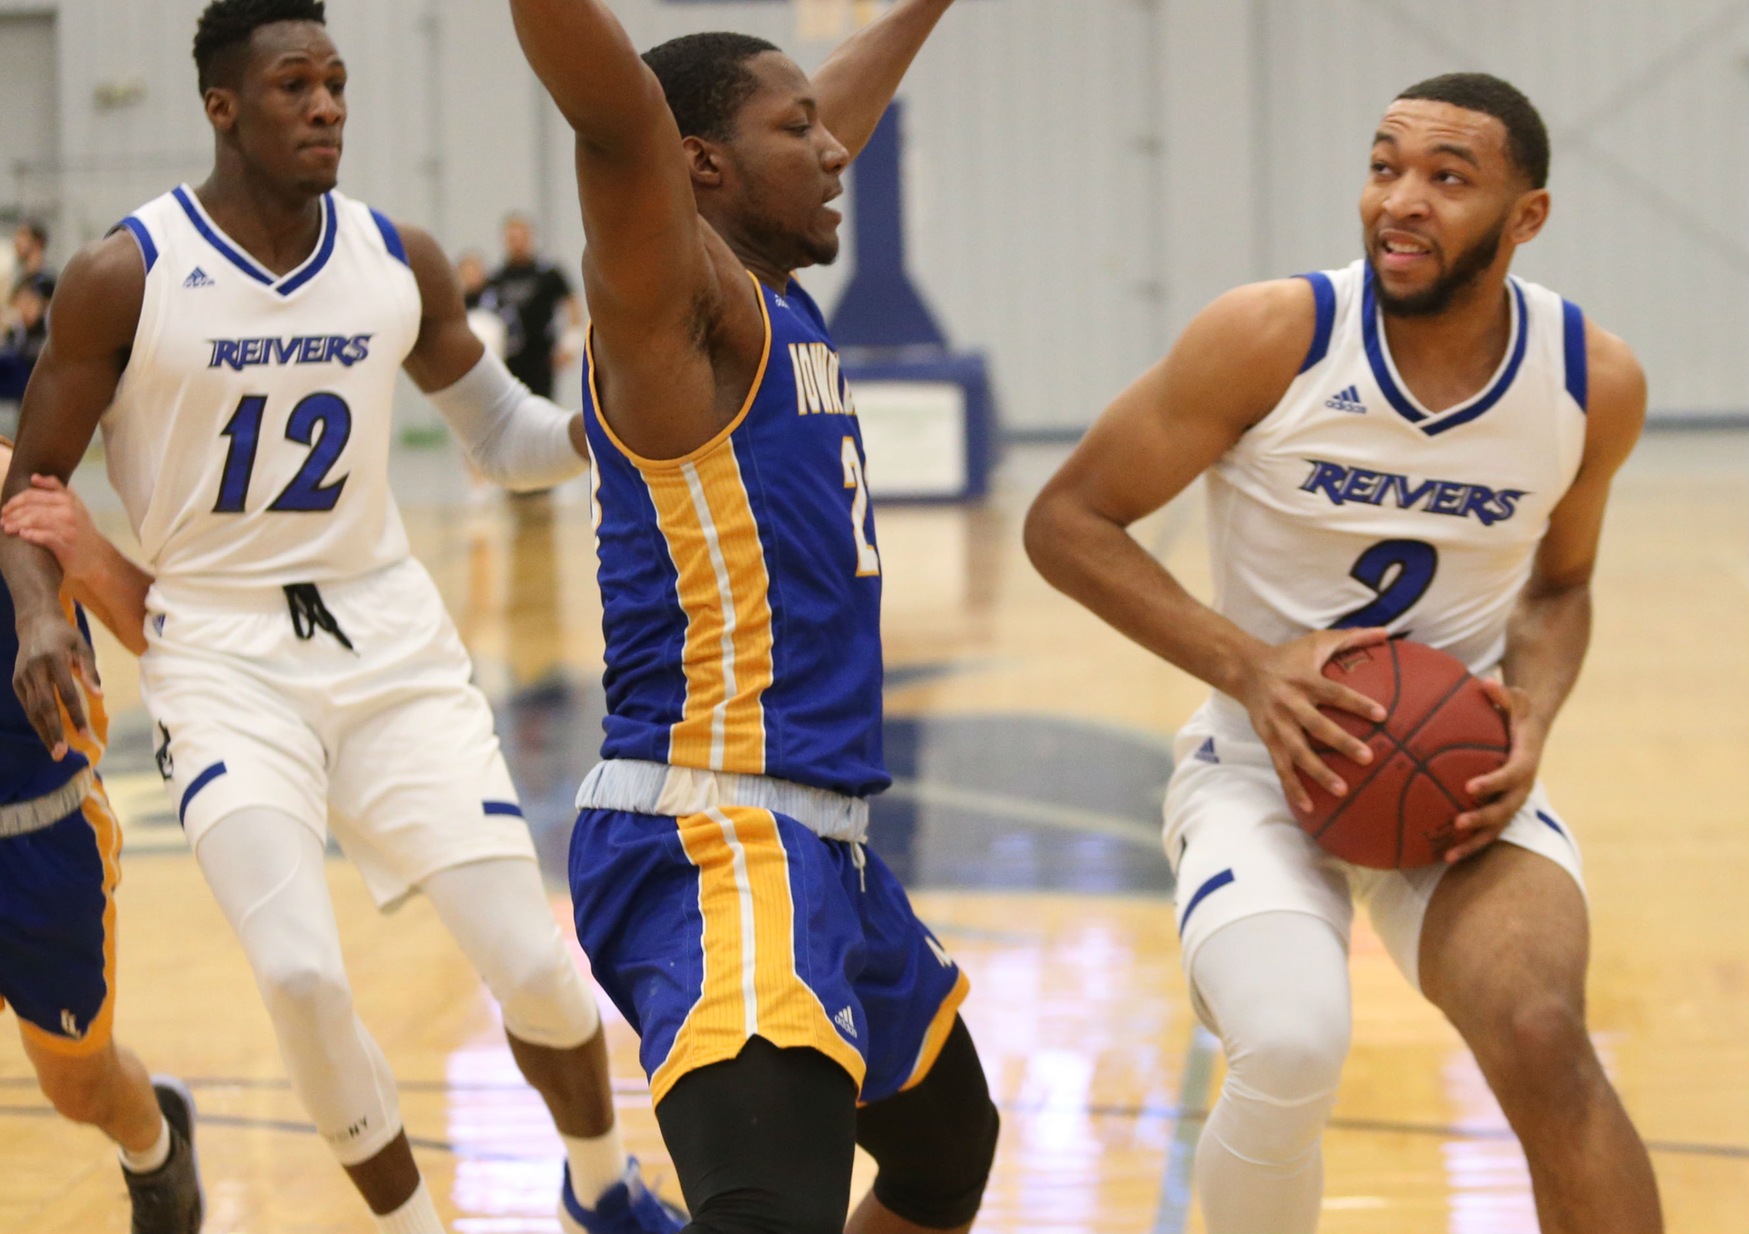 Christian Bentley's (#2) 19 point, 4 assist evening helped Iowa Western "return the favor" against a Sunrise Christian team that handed the Reivers their first loss of the season back in November.